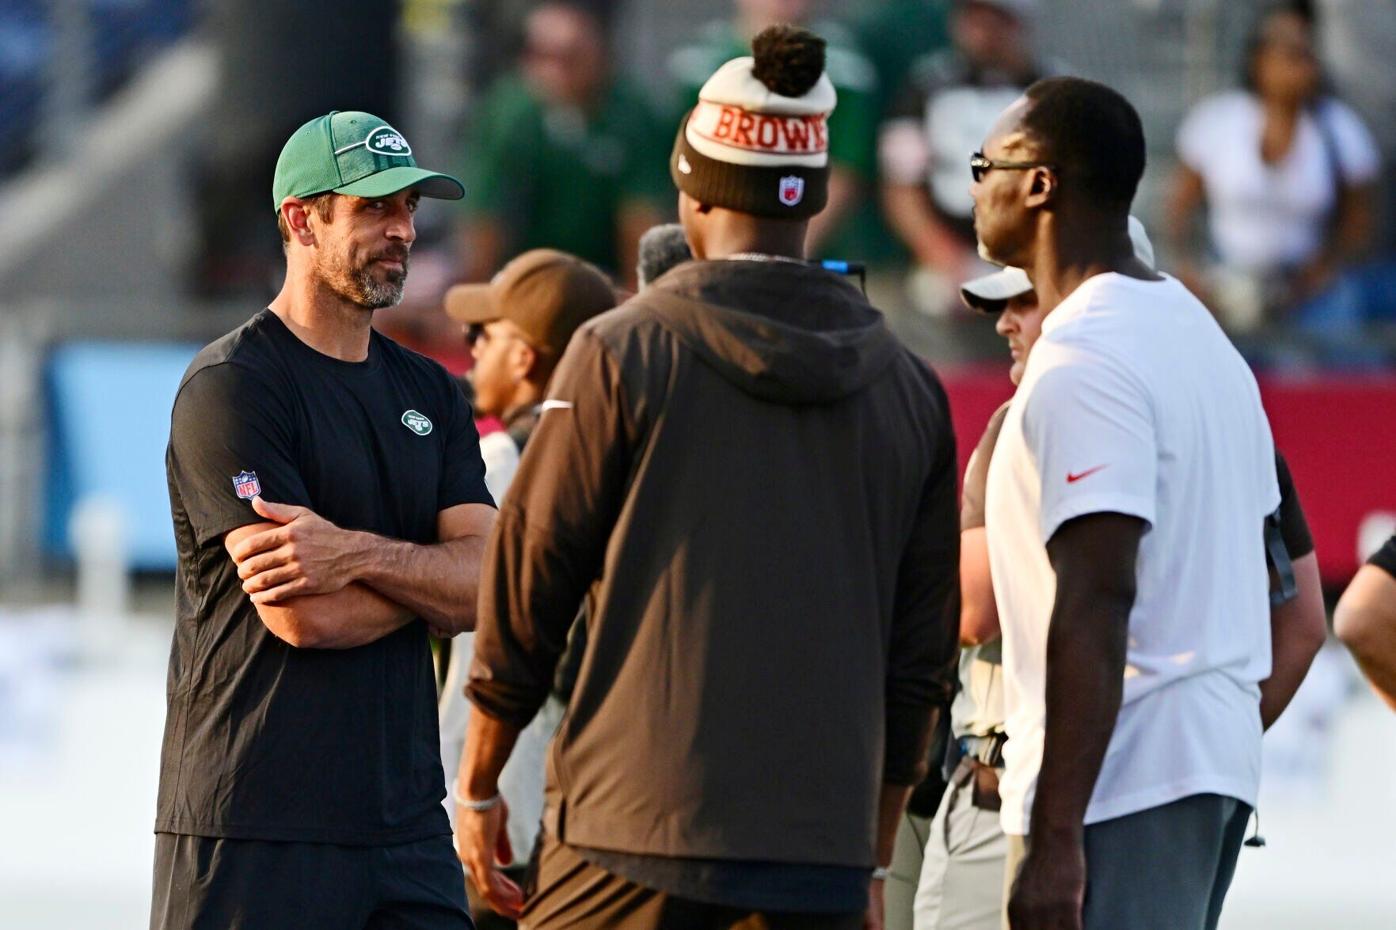 Jets' Aaron Rodgers says he isn't 'savior' – but the QB sort of is